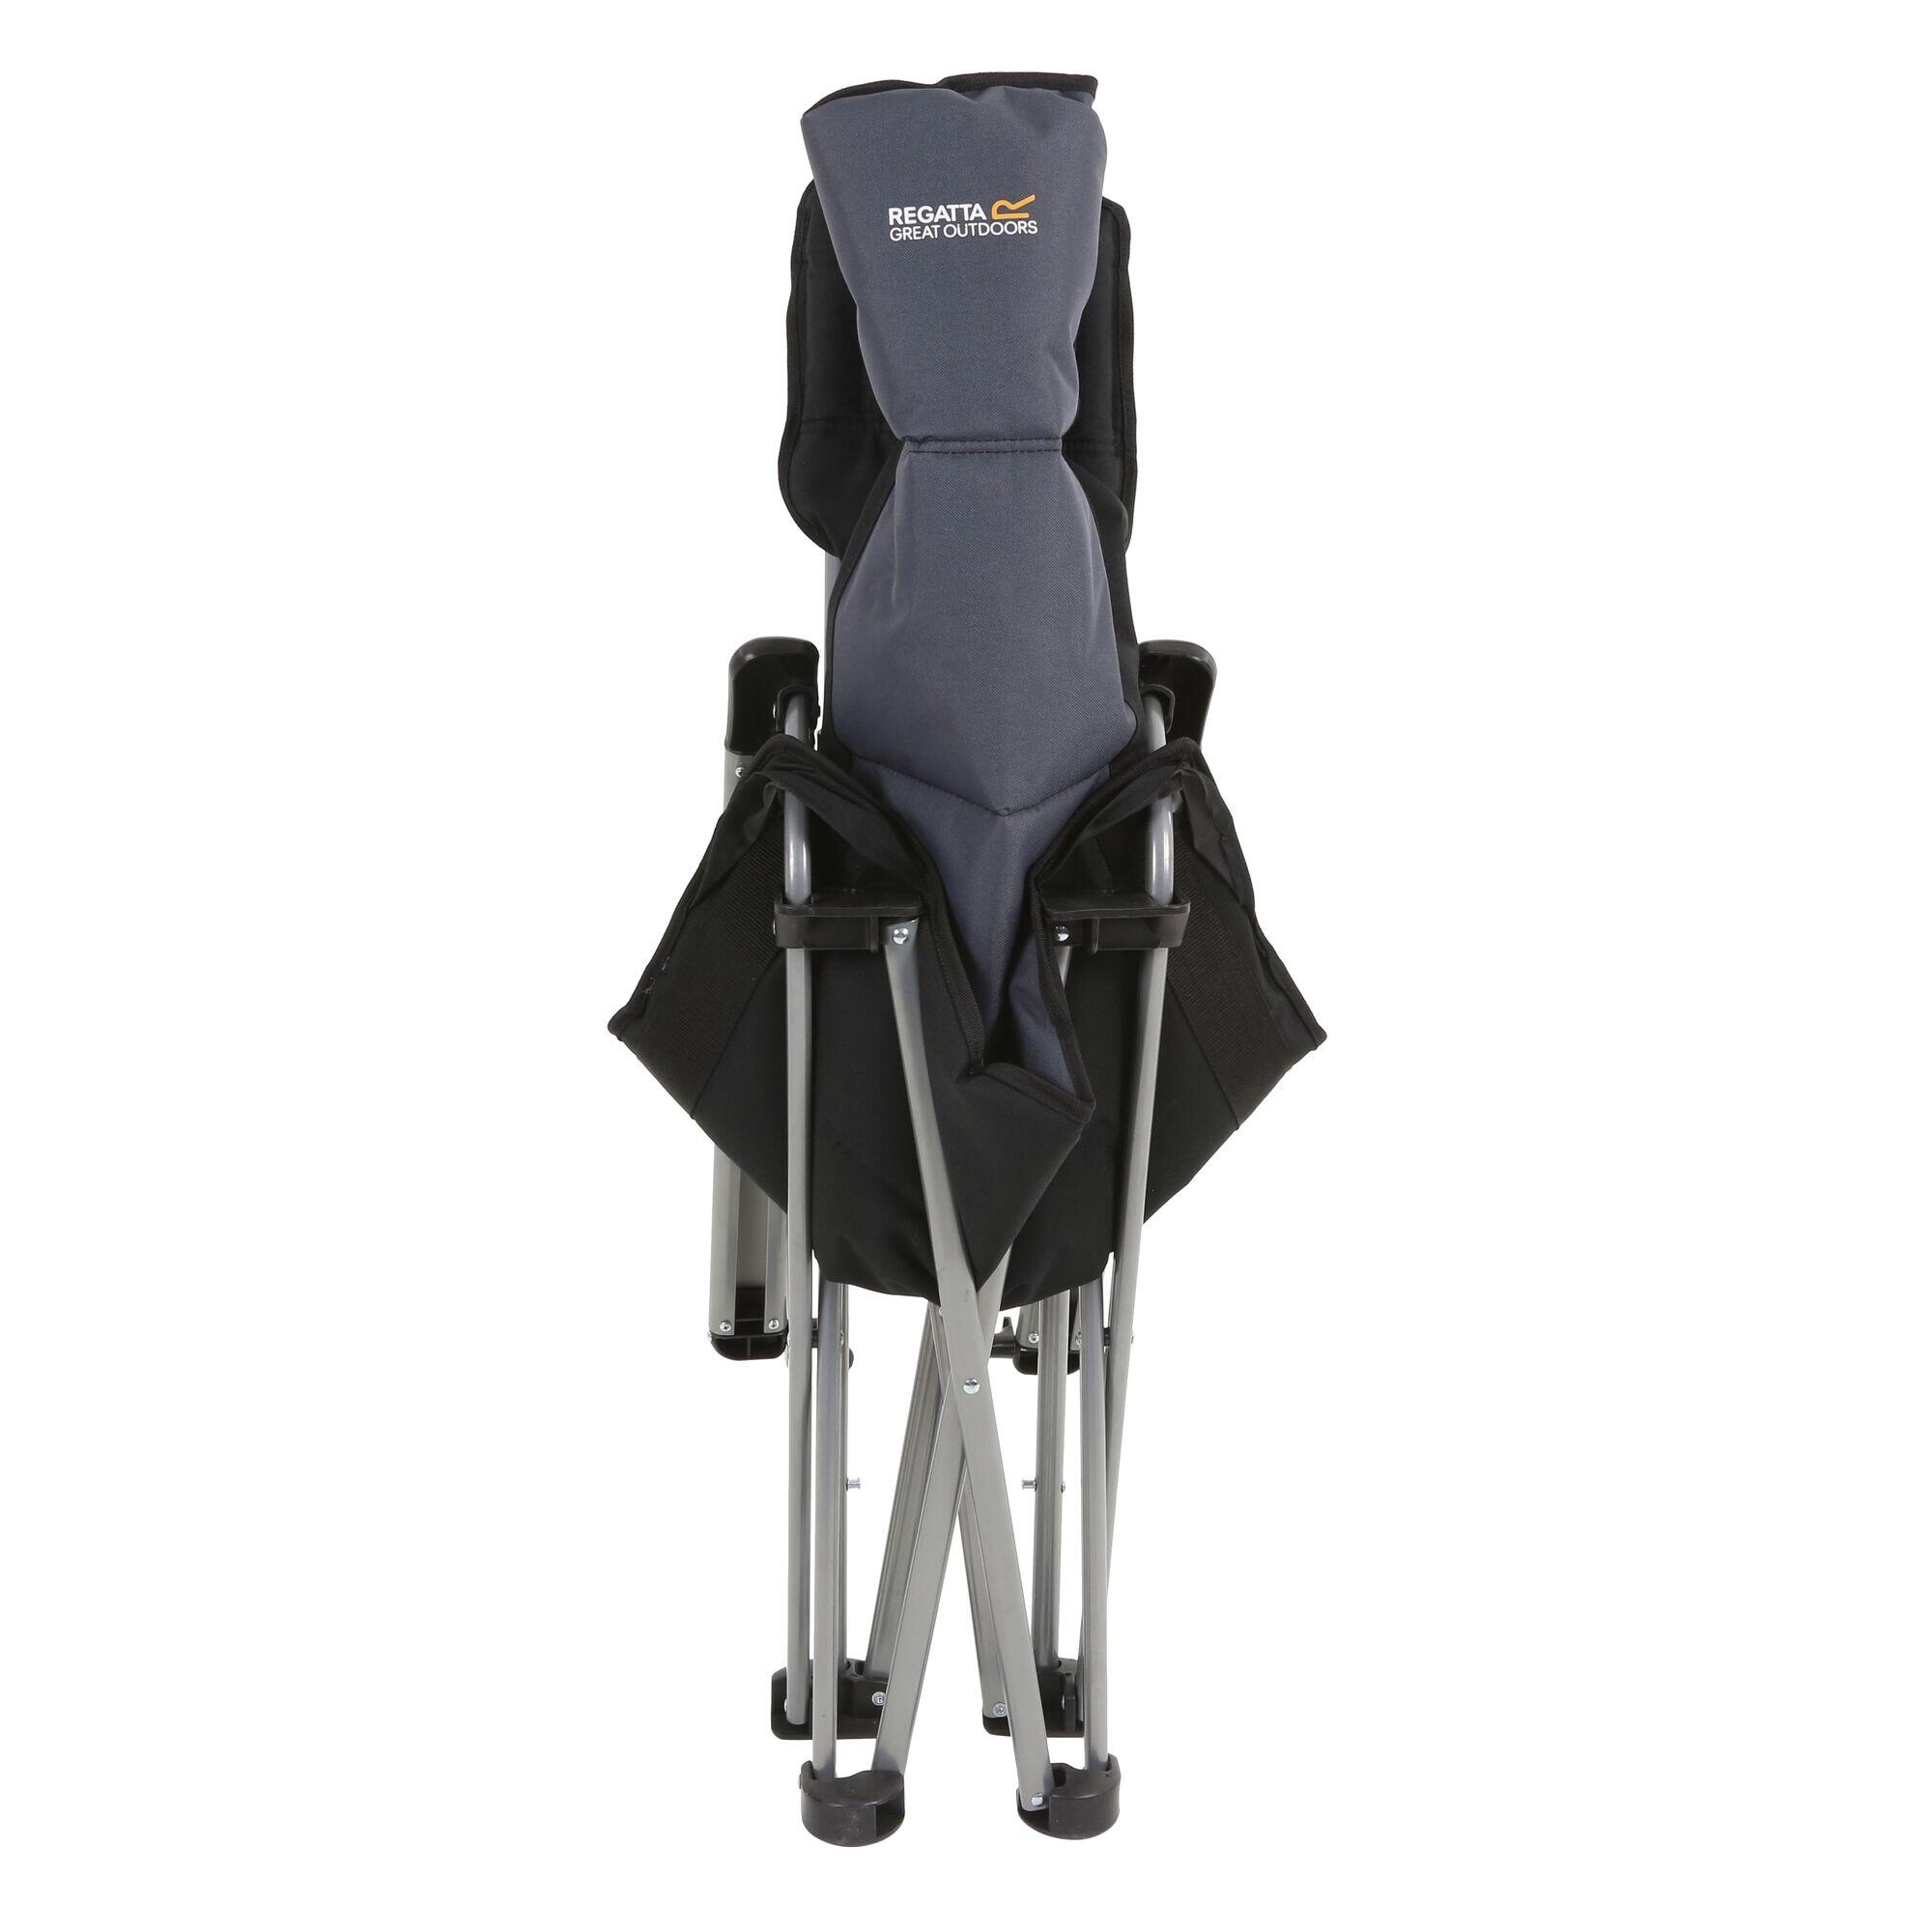 Forza Adults' Camping Chair - Black Seal Grey 5/5